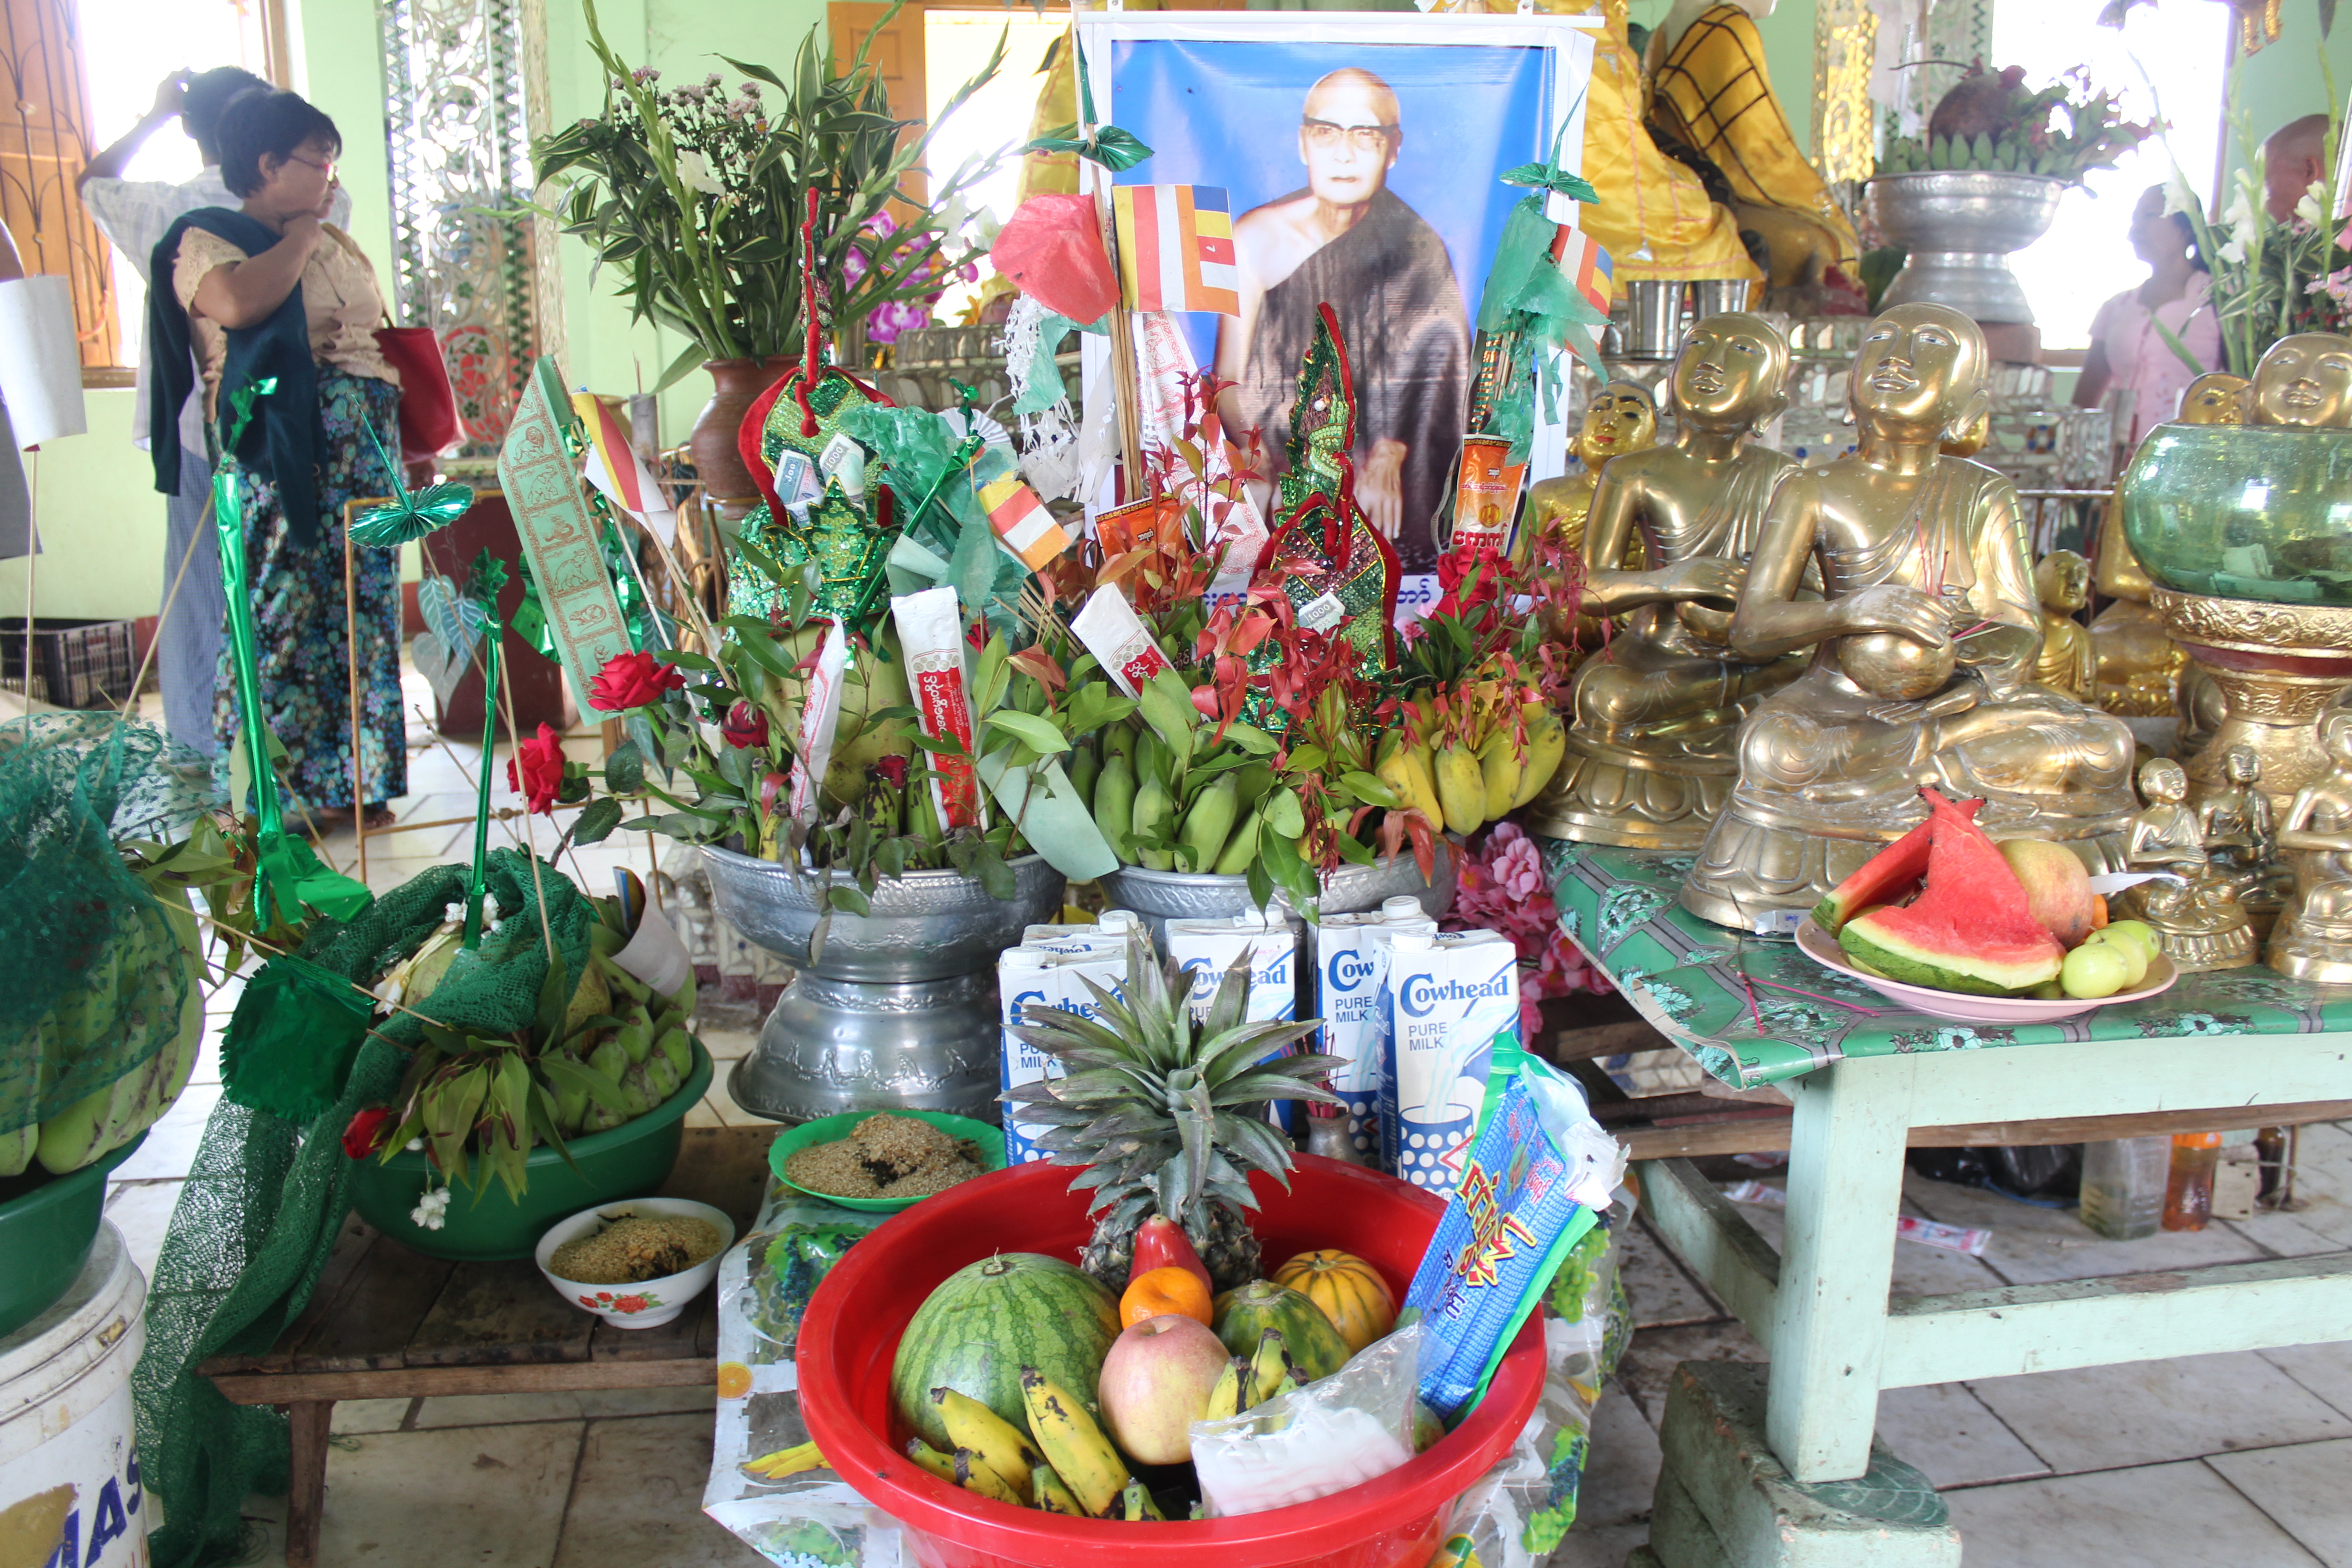 Worshippers place gifts like these in the Twante Snake Temple, hoping the forces of nature will intercede on their behalf. Photo: Jacob Goldberg